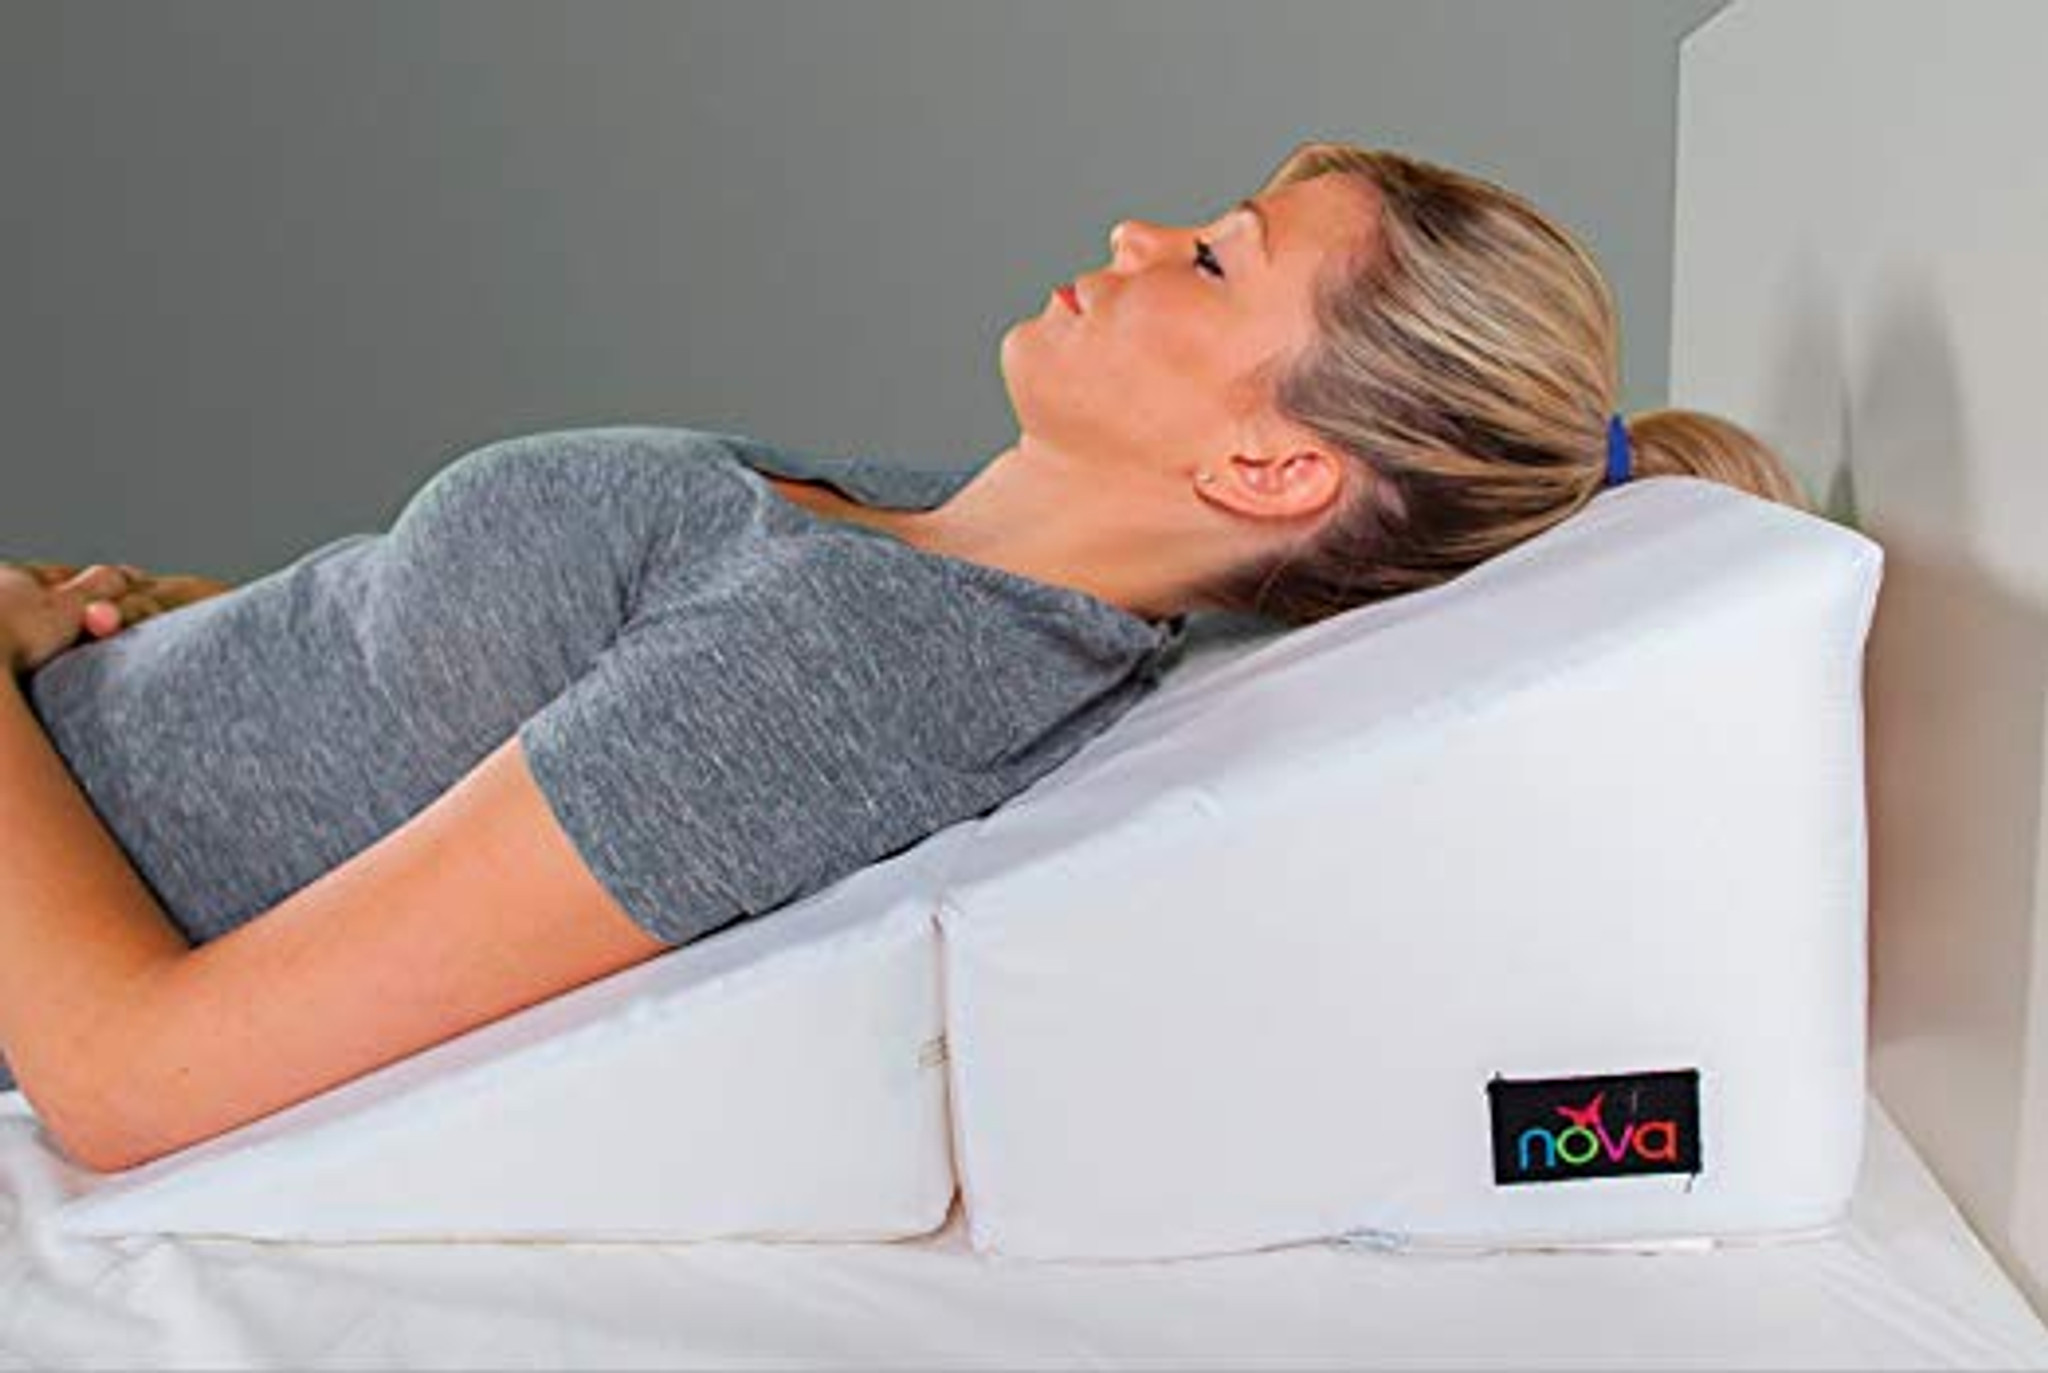 https://cdn11.bigcommerce.com/s-79bvd/images/stencil/2048x2048/products/13509/27232/NOVA_Medical_Products_7.5_Folding_Bed_Wedge_Pillow_Table_4__84686.1538584680.jpg?c=2